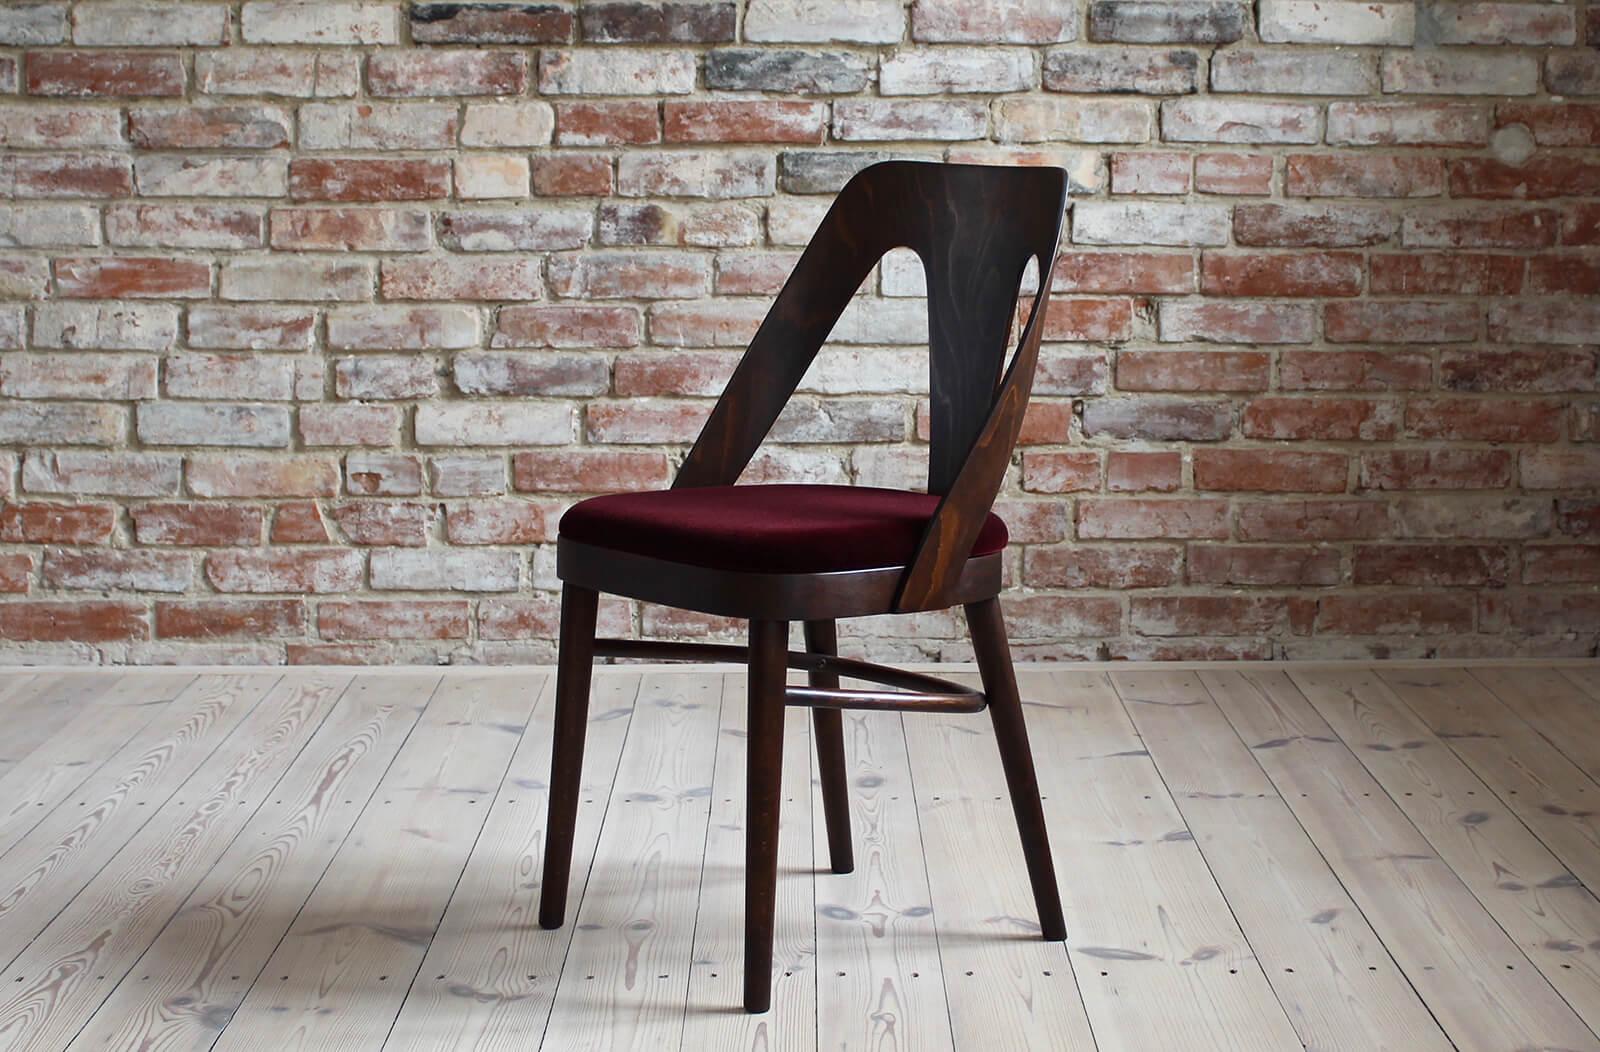 Polish Set of 4 Midcentury Dining Chairs in Burgundy Mohair by Kvadrat